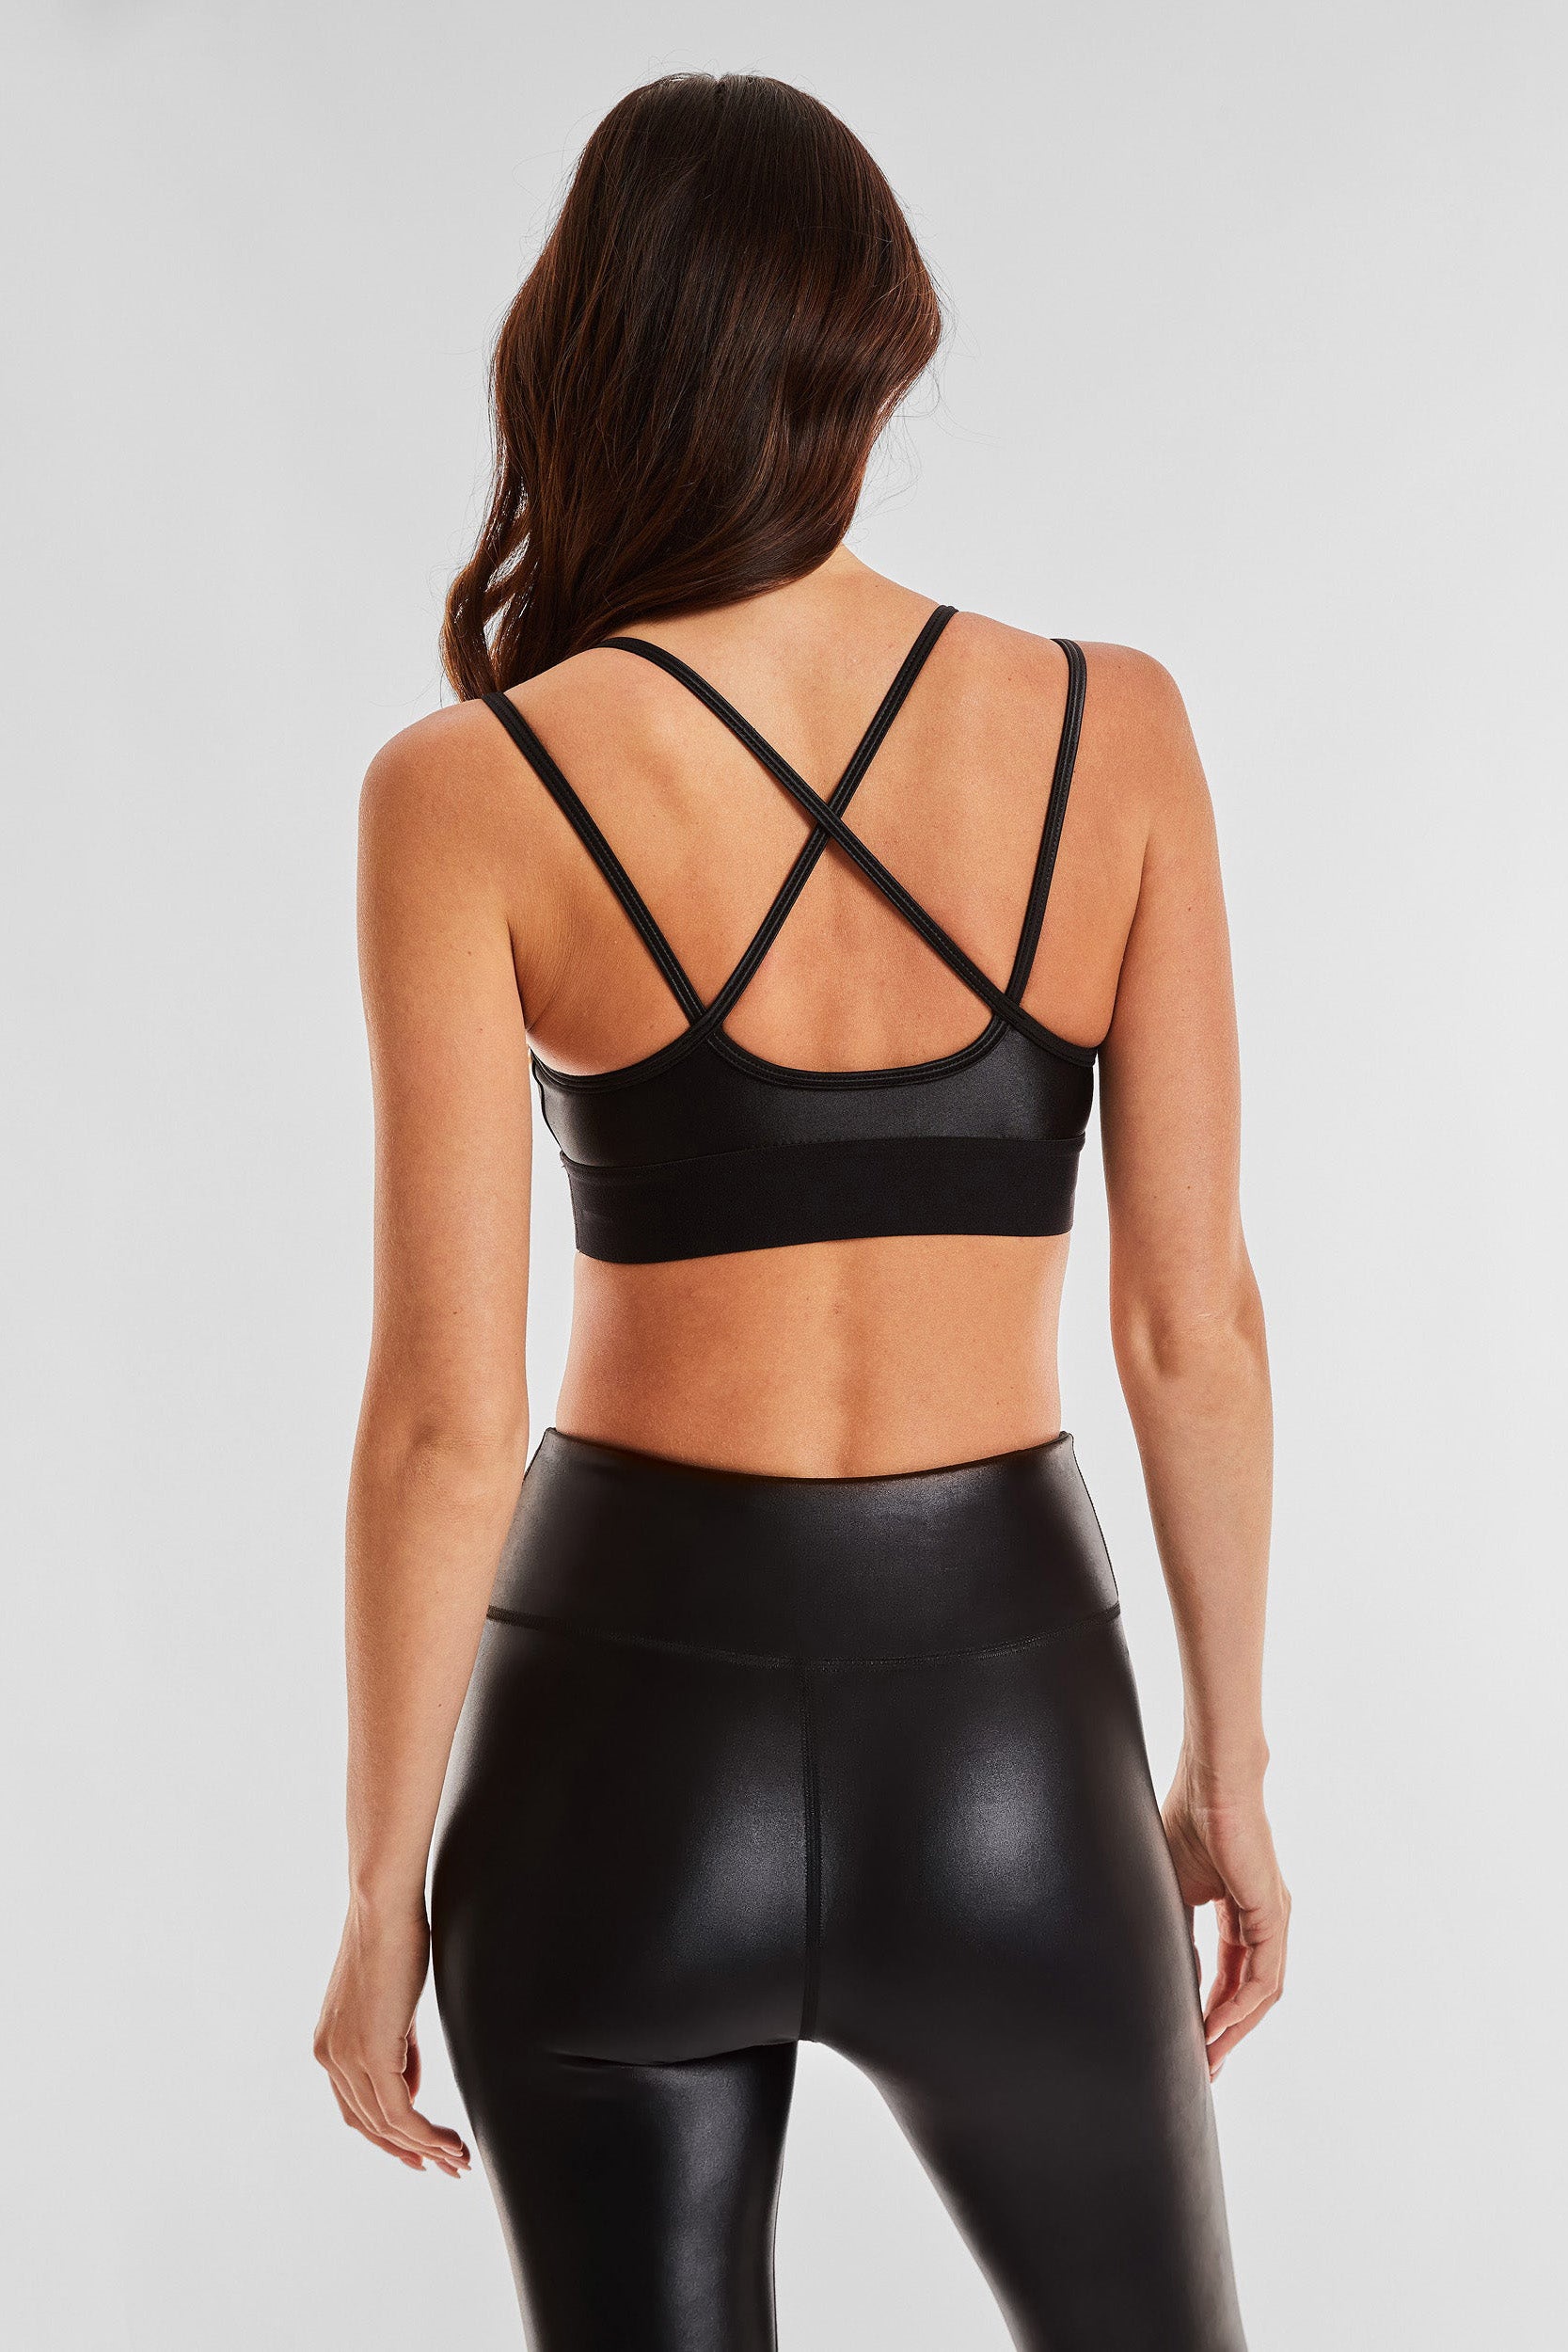 A woman with long wavy hair is shown from behind wearing a black strappy Liquid Jolie Bra - Black Gloss and high-waisted black leggings. The moisture-wicking sports bra features an intricate criss-cross strap design on the back. The background is plain and white.